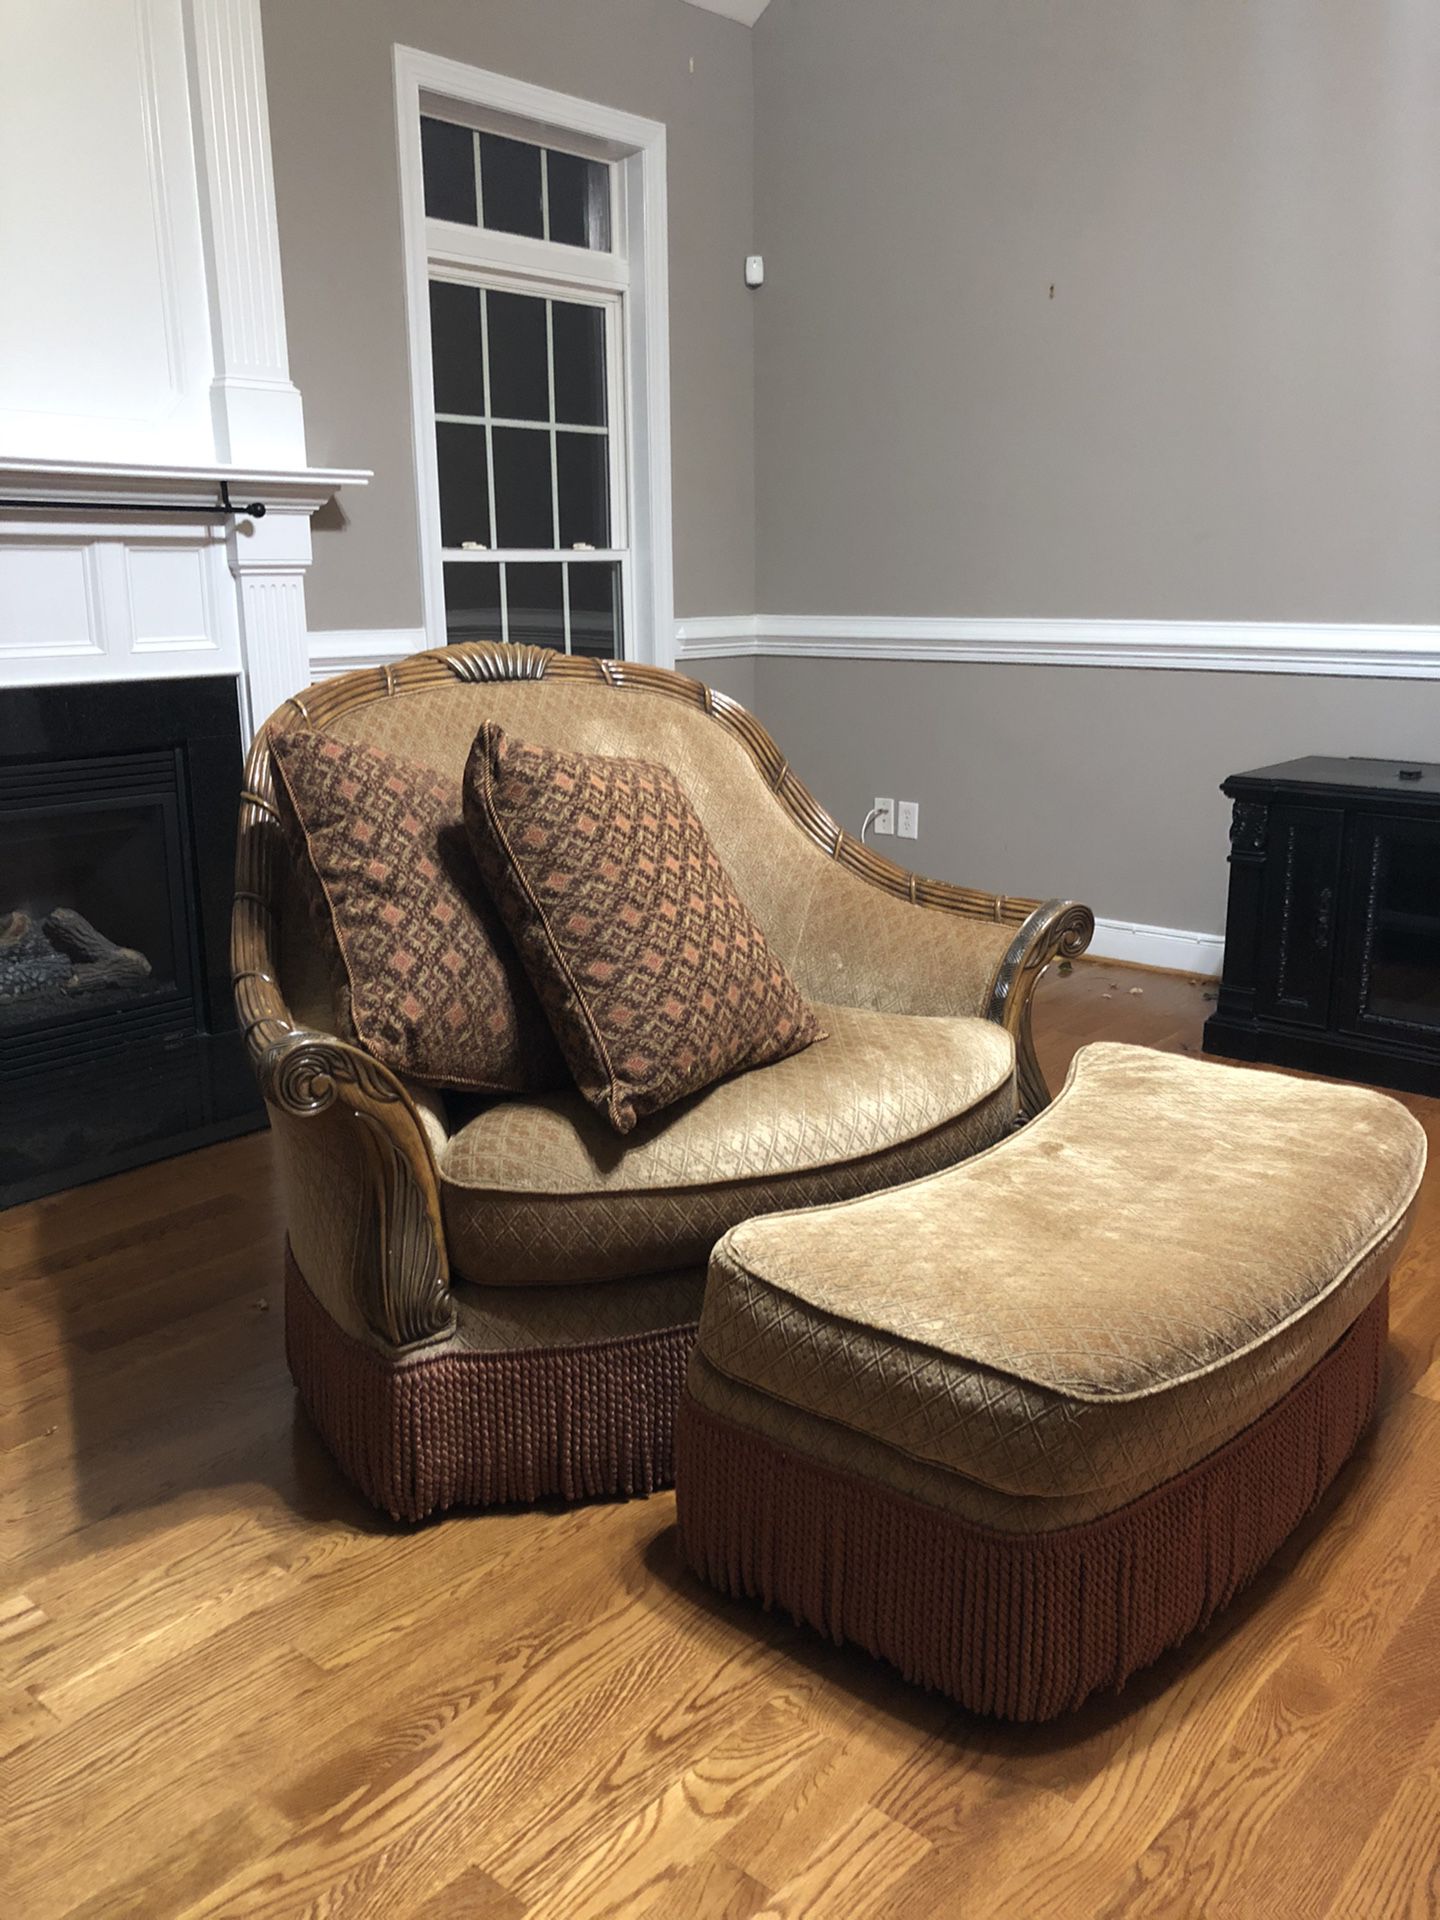 Designer Chair 1/2 With Ottoman And Throw pillows